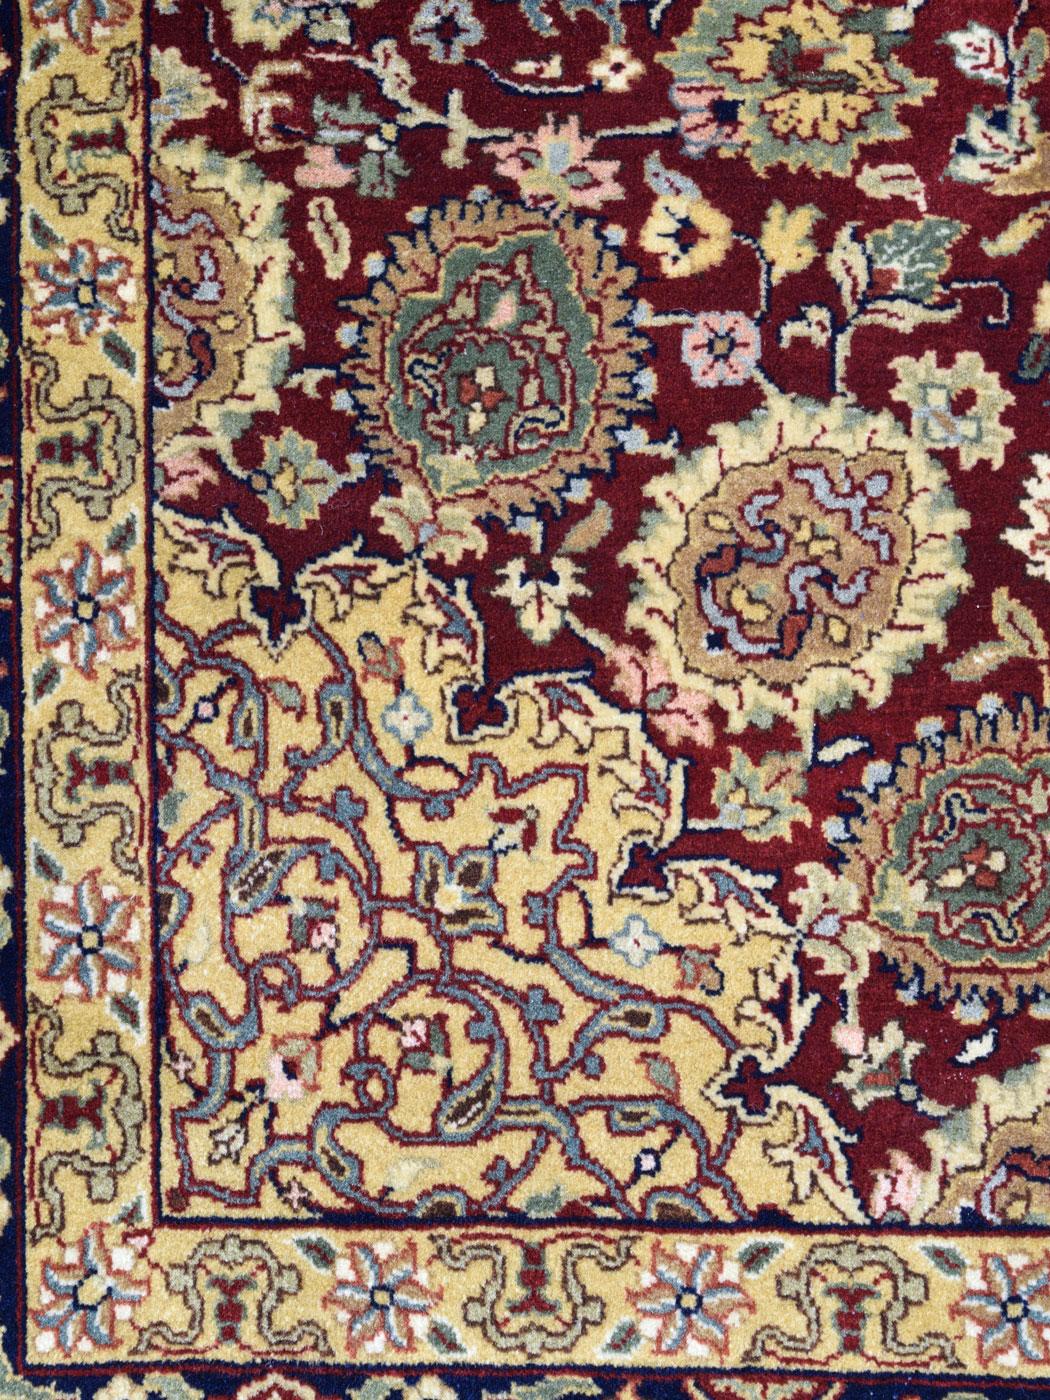 Fine Hand Knotted Tabriz Carpet in Gold Maroon and Cream Wool, 5' x 7' For Sale 1